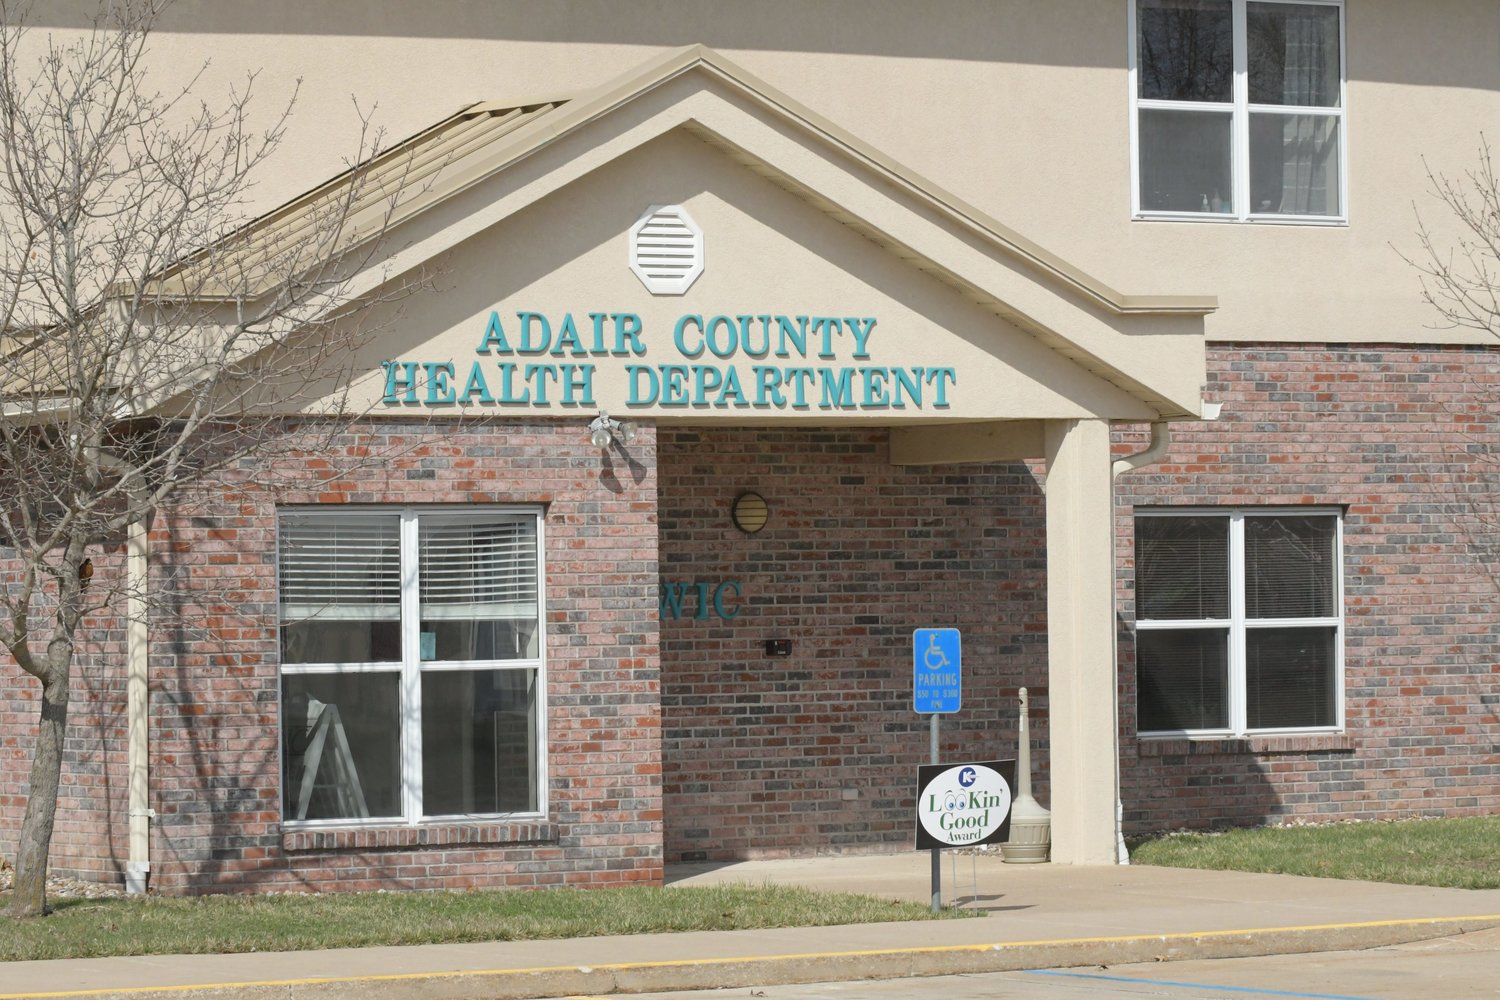 Daily Express photo of the Adair County Health Department's headquarters.